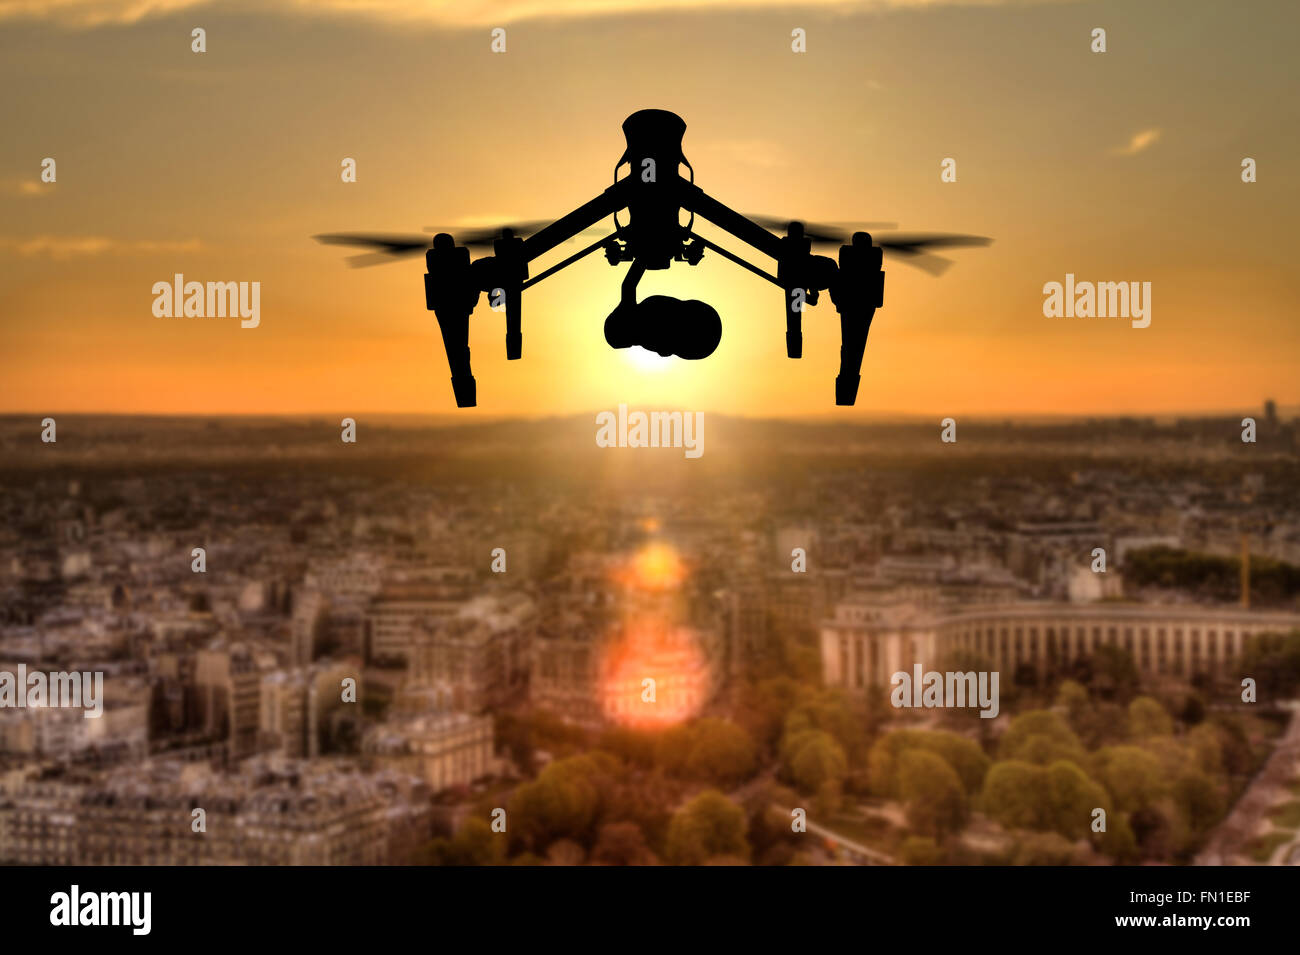 Drone silhouette flying above Paris city panorama Stock Photo